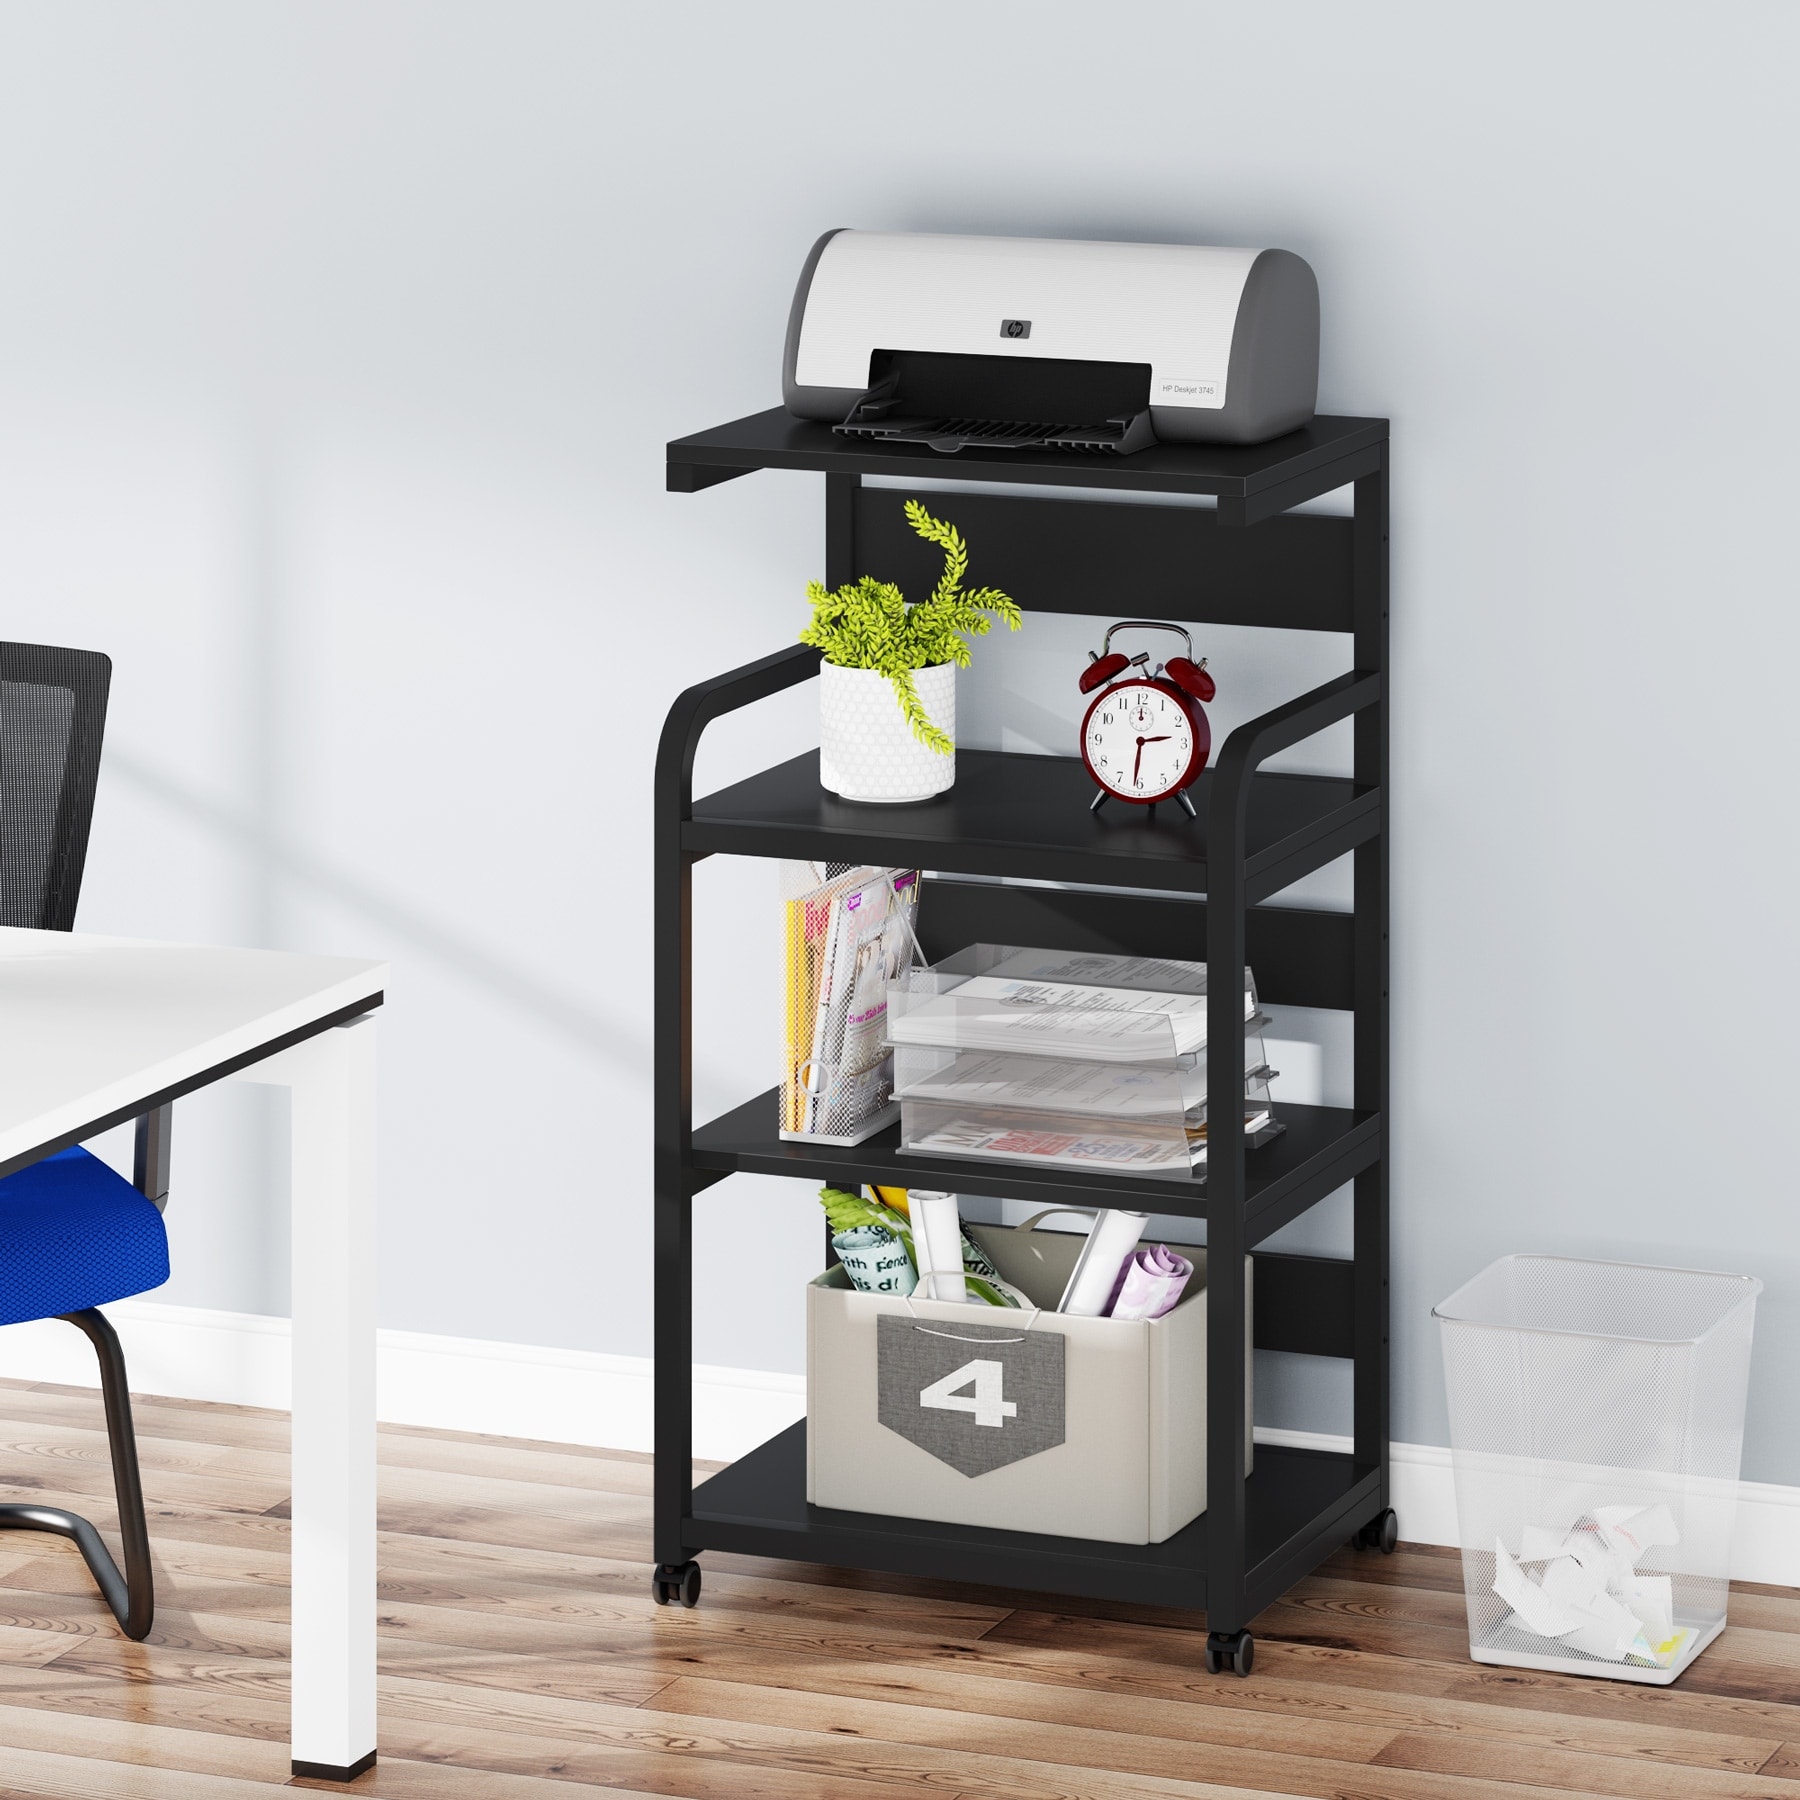 https://ak1.ostkcdn.com/images/products/is/images/direct/ea2b32efd4d92d1ee75c7bc4b5ce1cc3fed658f5/Tribesigns-4-tier-Mobile-Printer-Stand-with-Storage-Shelves%2CWood-Under-Desk-Printer-Cart-on-Wheels-for-Home-Office.jpg